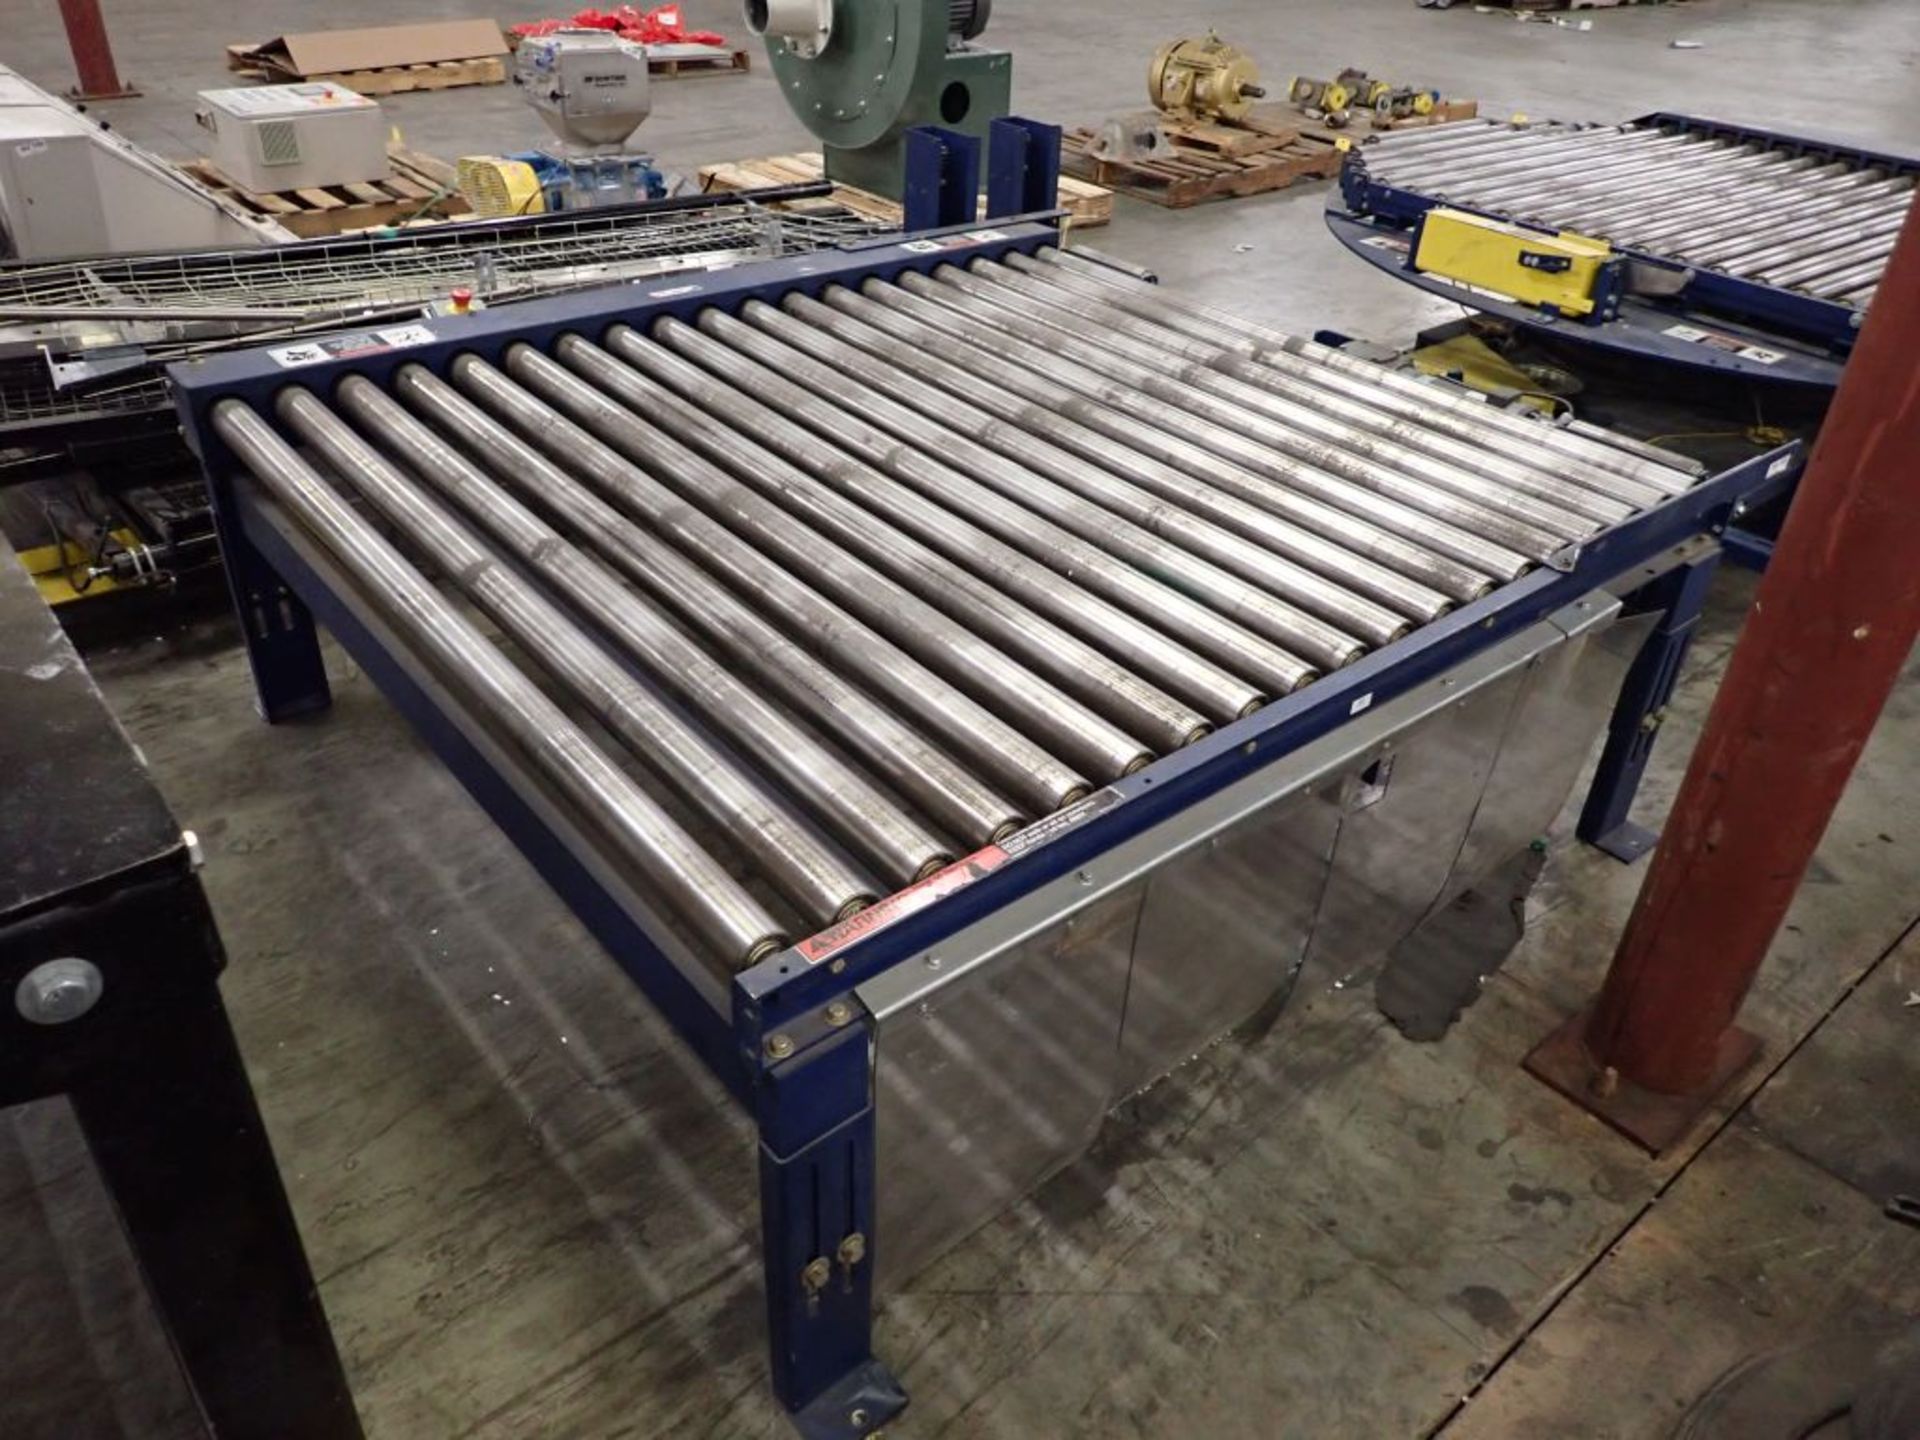 Lantech Pallet Wrapping System with Infeed and Outfeed Conveyor - Image 71 of 99